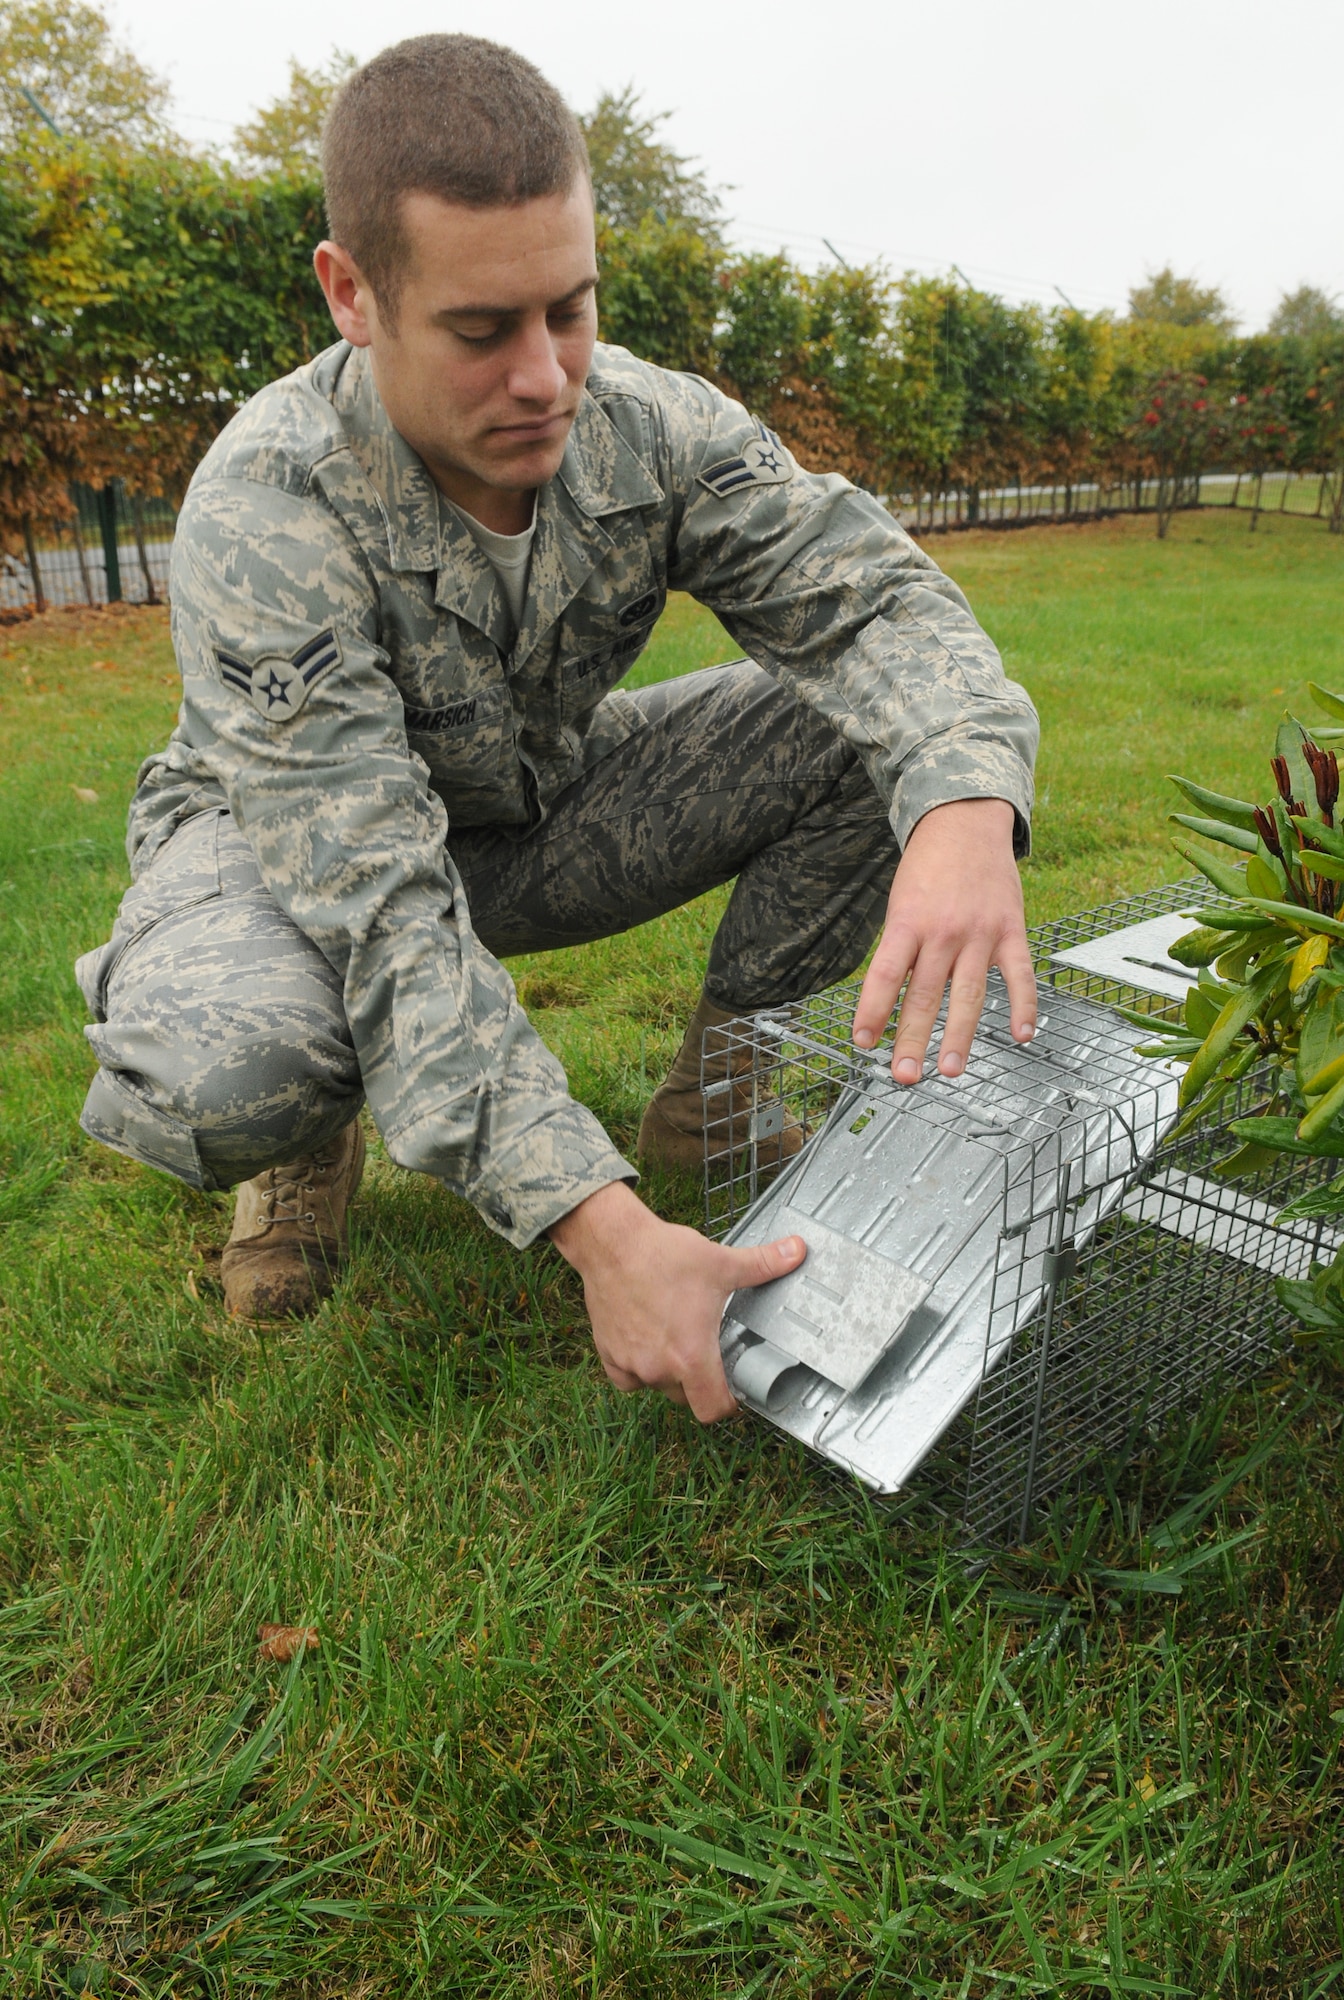 SPANGDAHLEM AIR BASE, Germany -- Airman 1st Class Sean Marsich, 52nd Civil Engineer Squadron entomology shop, sets a live animal trap near a building here Oct. 6. The traps are used to capture small animals like cats, foxes and hedgehogs. The animals are caught in the trap and transported to a wildlife refuge nearby. (U.S. Air Force photo/Airman 1st Class Nathanael Callon)